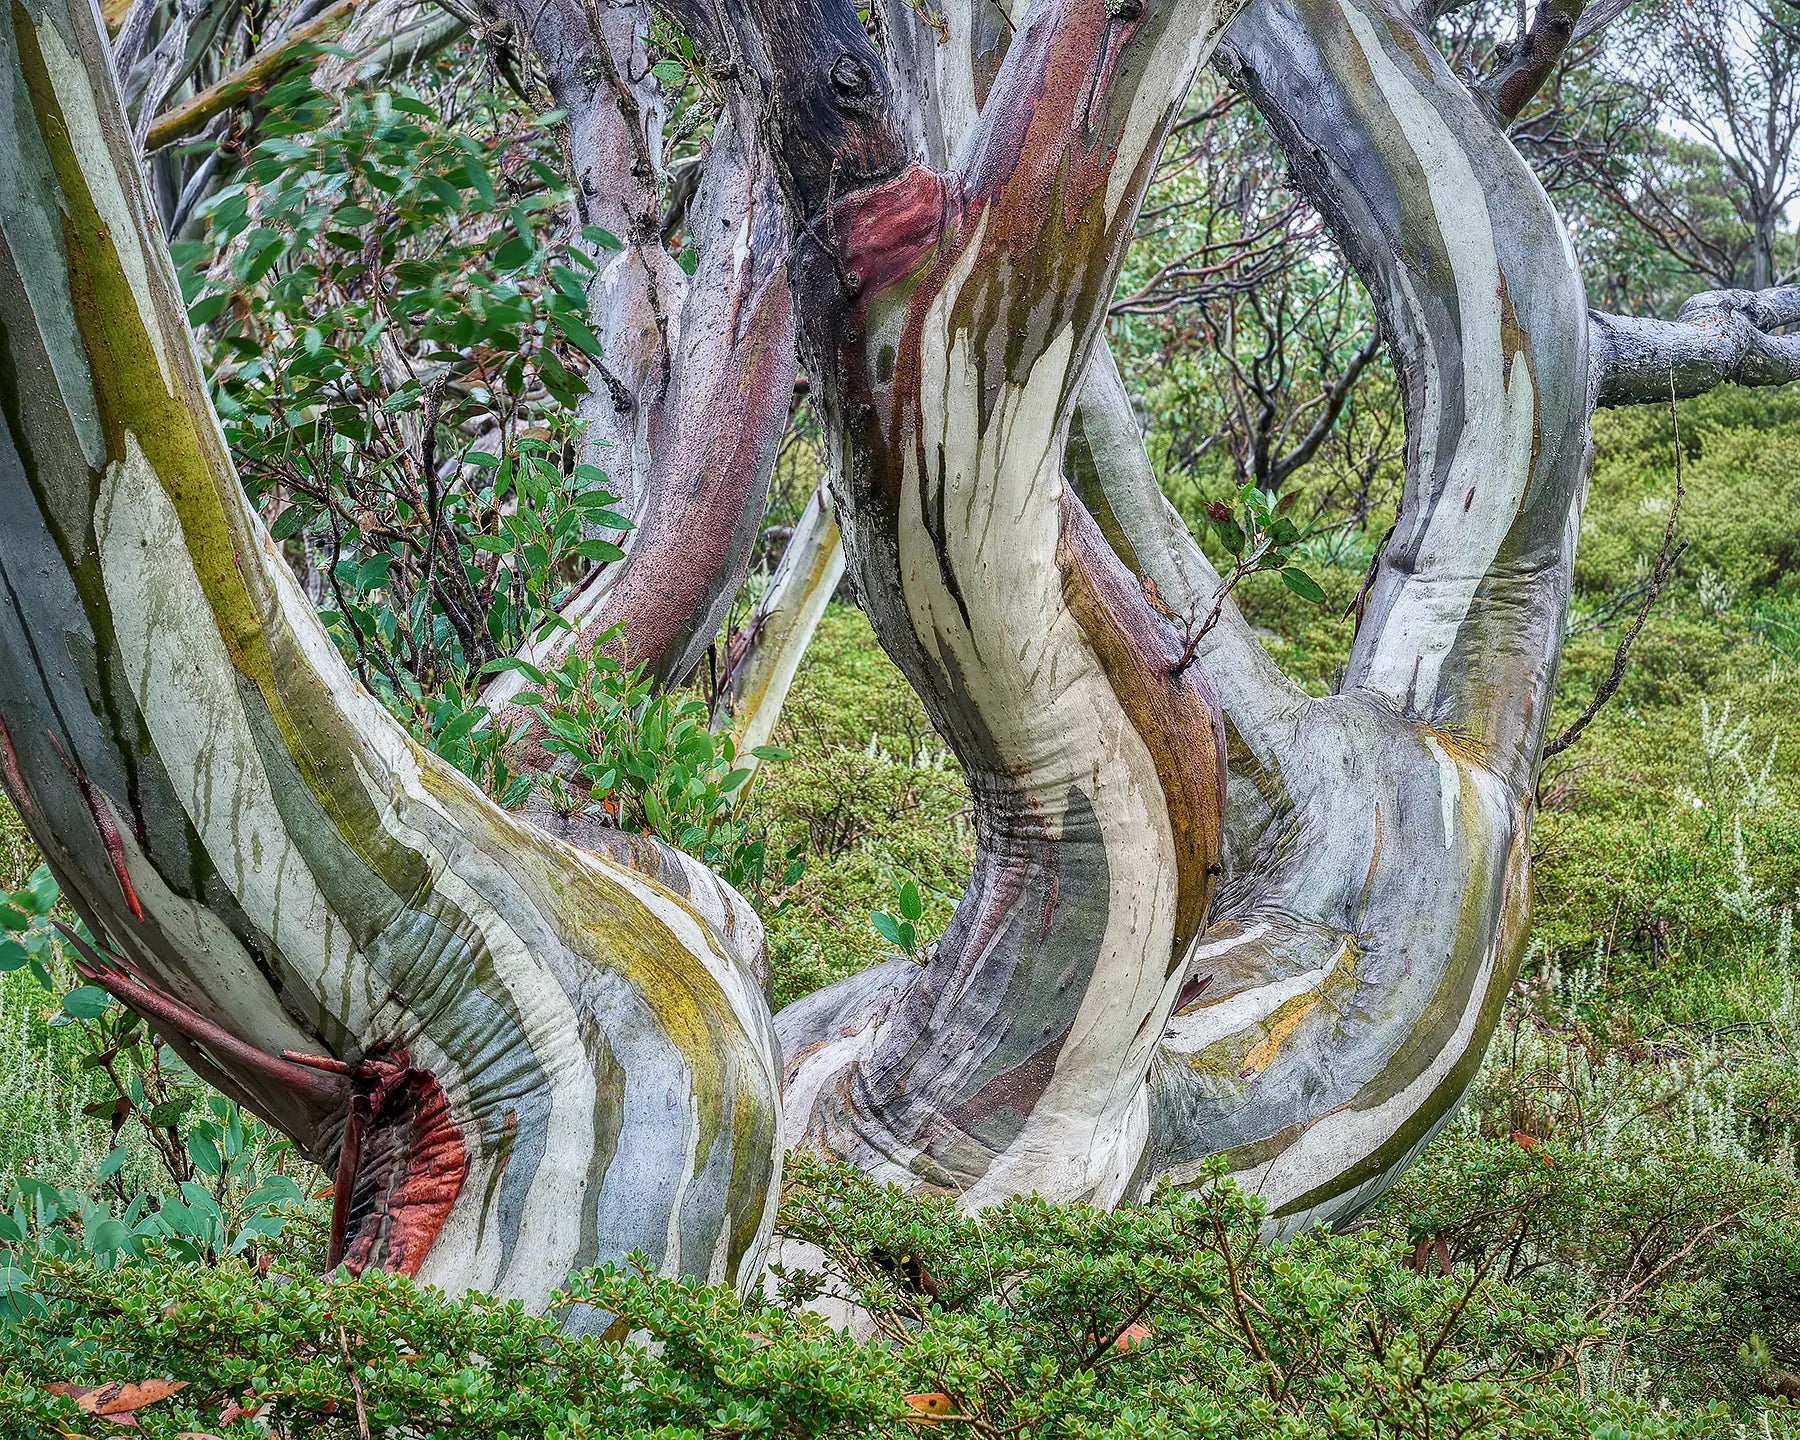 Curves - Twisted Snow Gums in Kosciuszko National Park